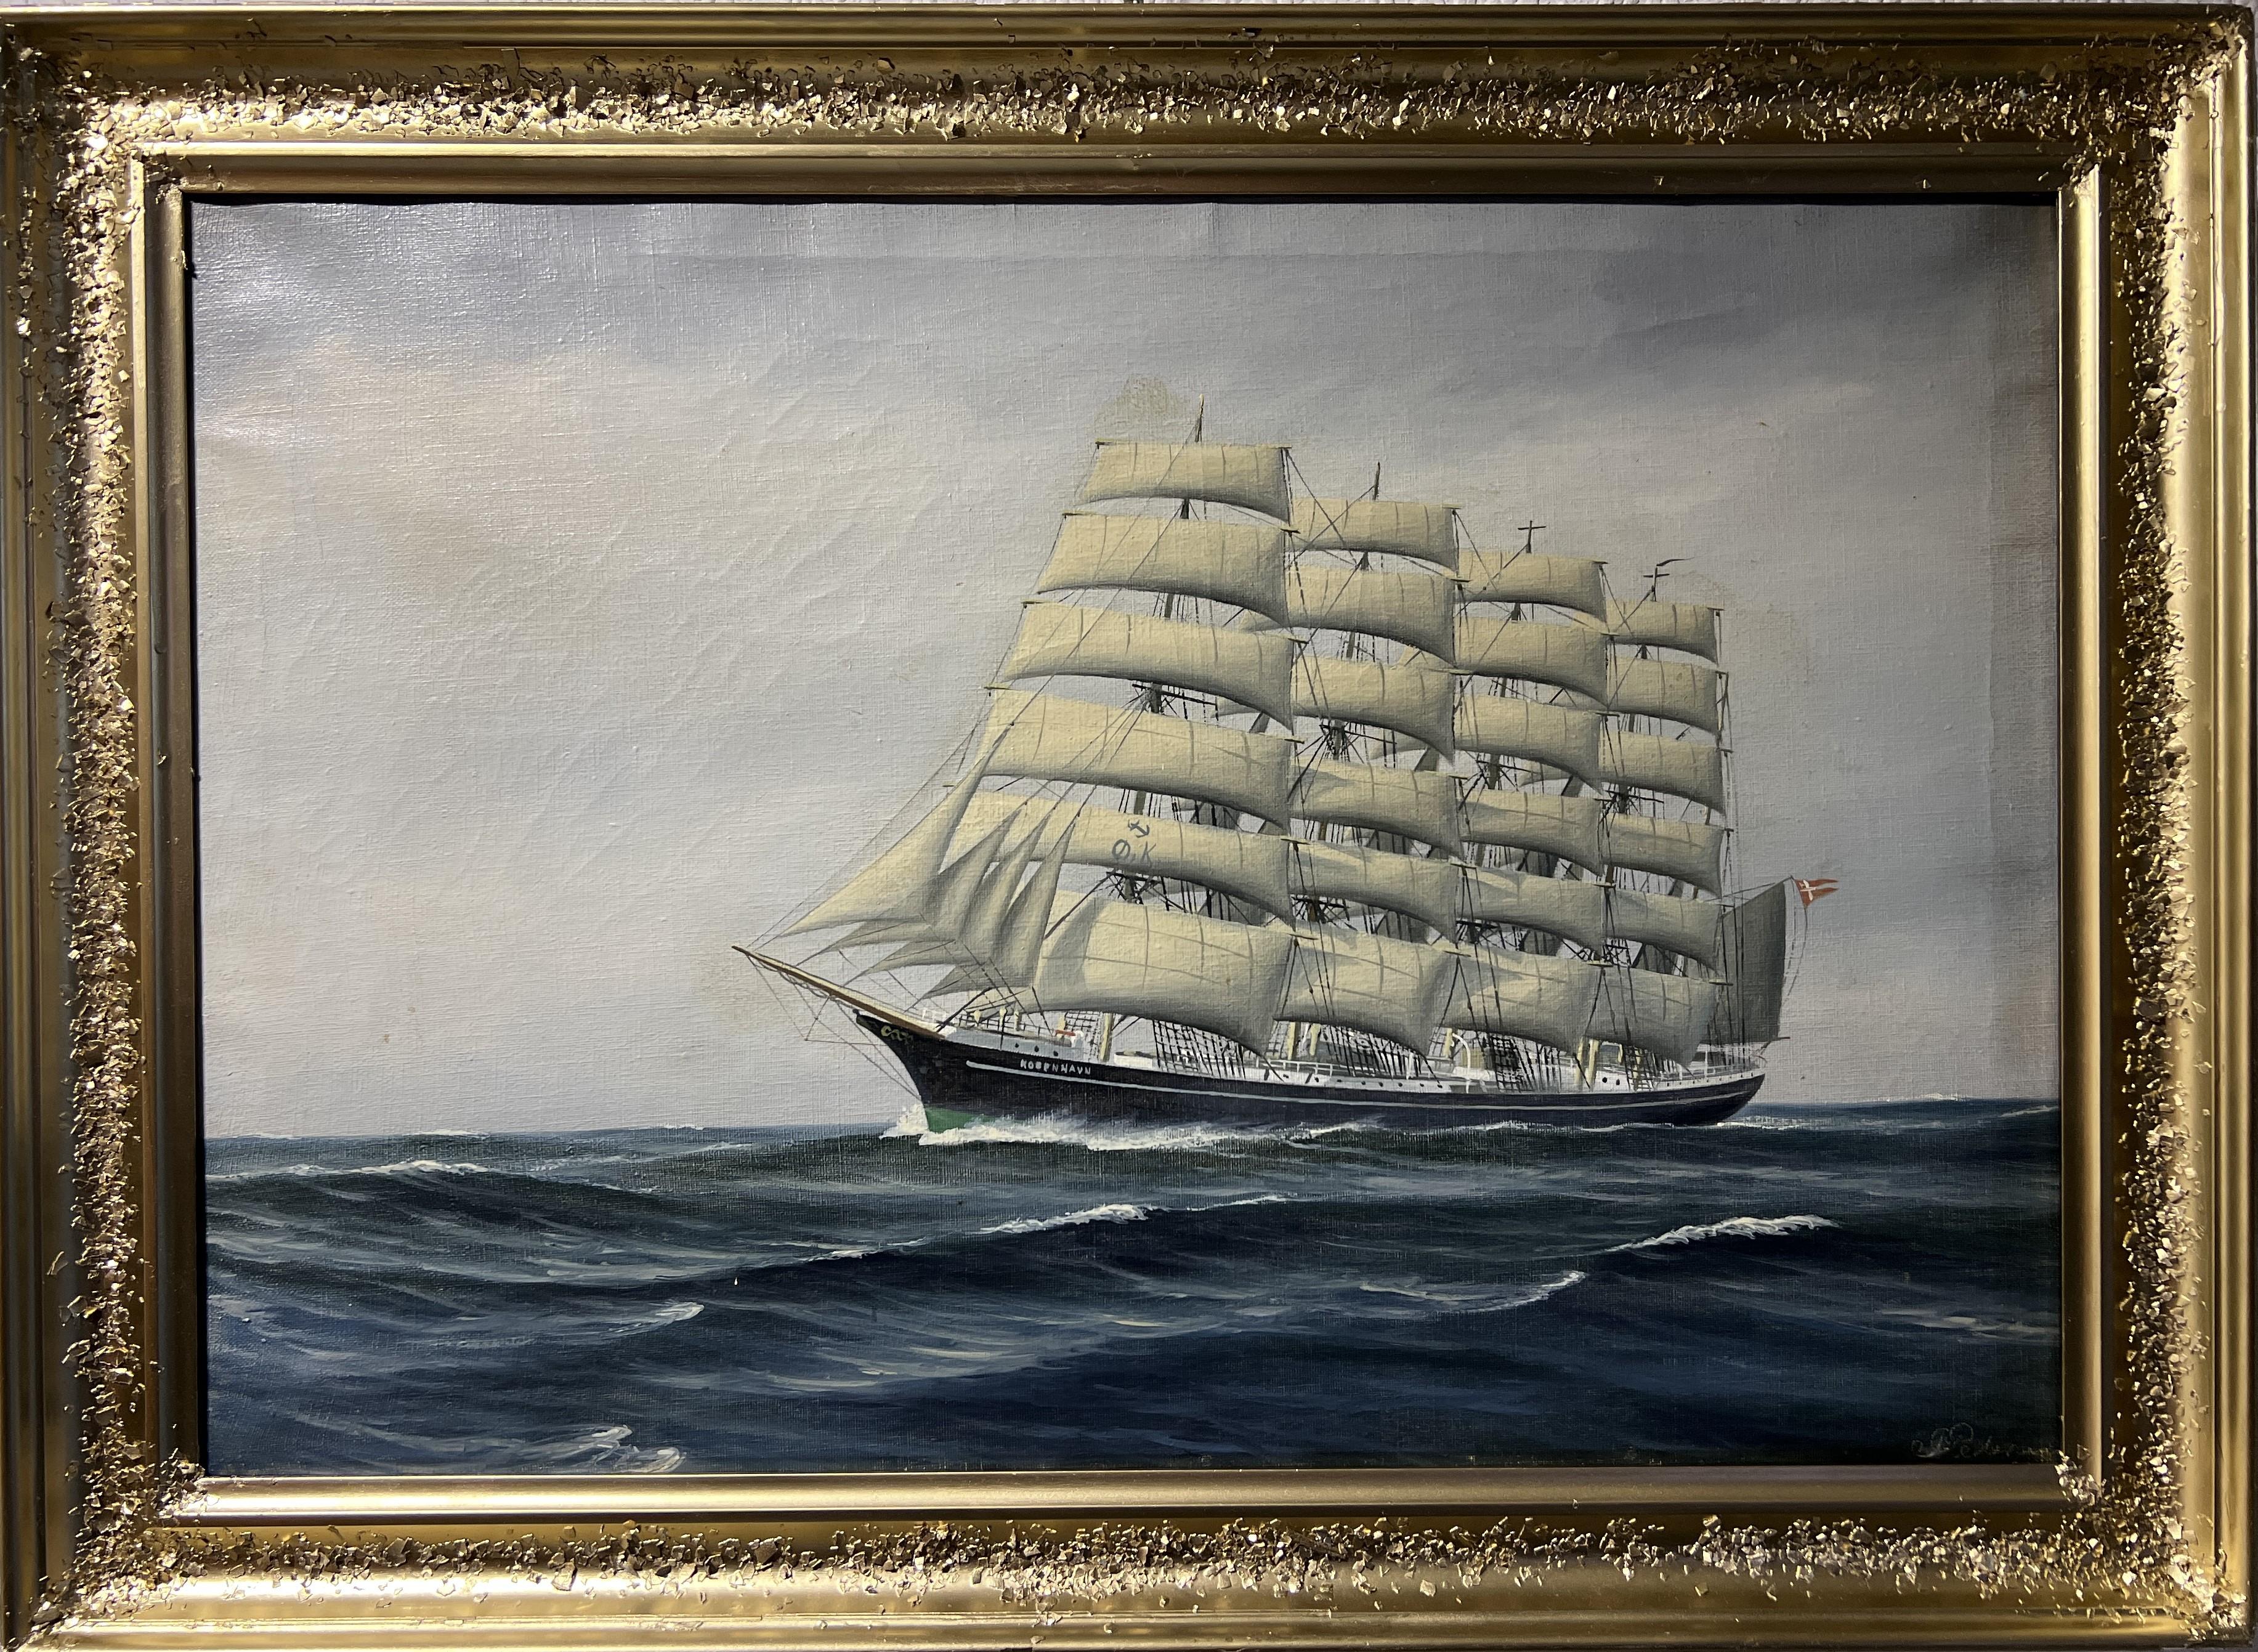     This is an original  Danish oil painting on canvas depicting a BARQUE SHIP KOBENHAVN. 

Signed in the lower-right corner P.Pedersen. Varnished. Painting with surface grime and a few spots of soiling. Please see the photos.

Presented in a golden